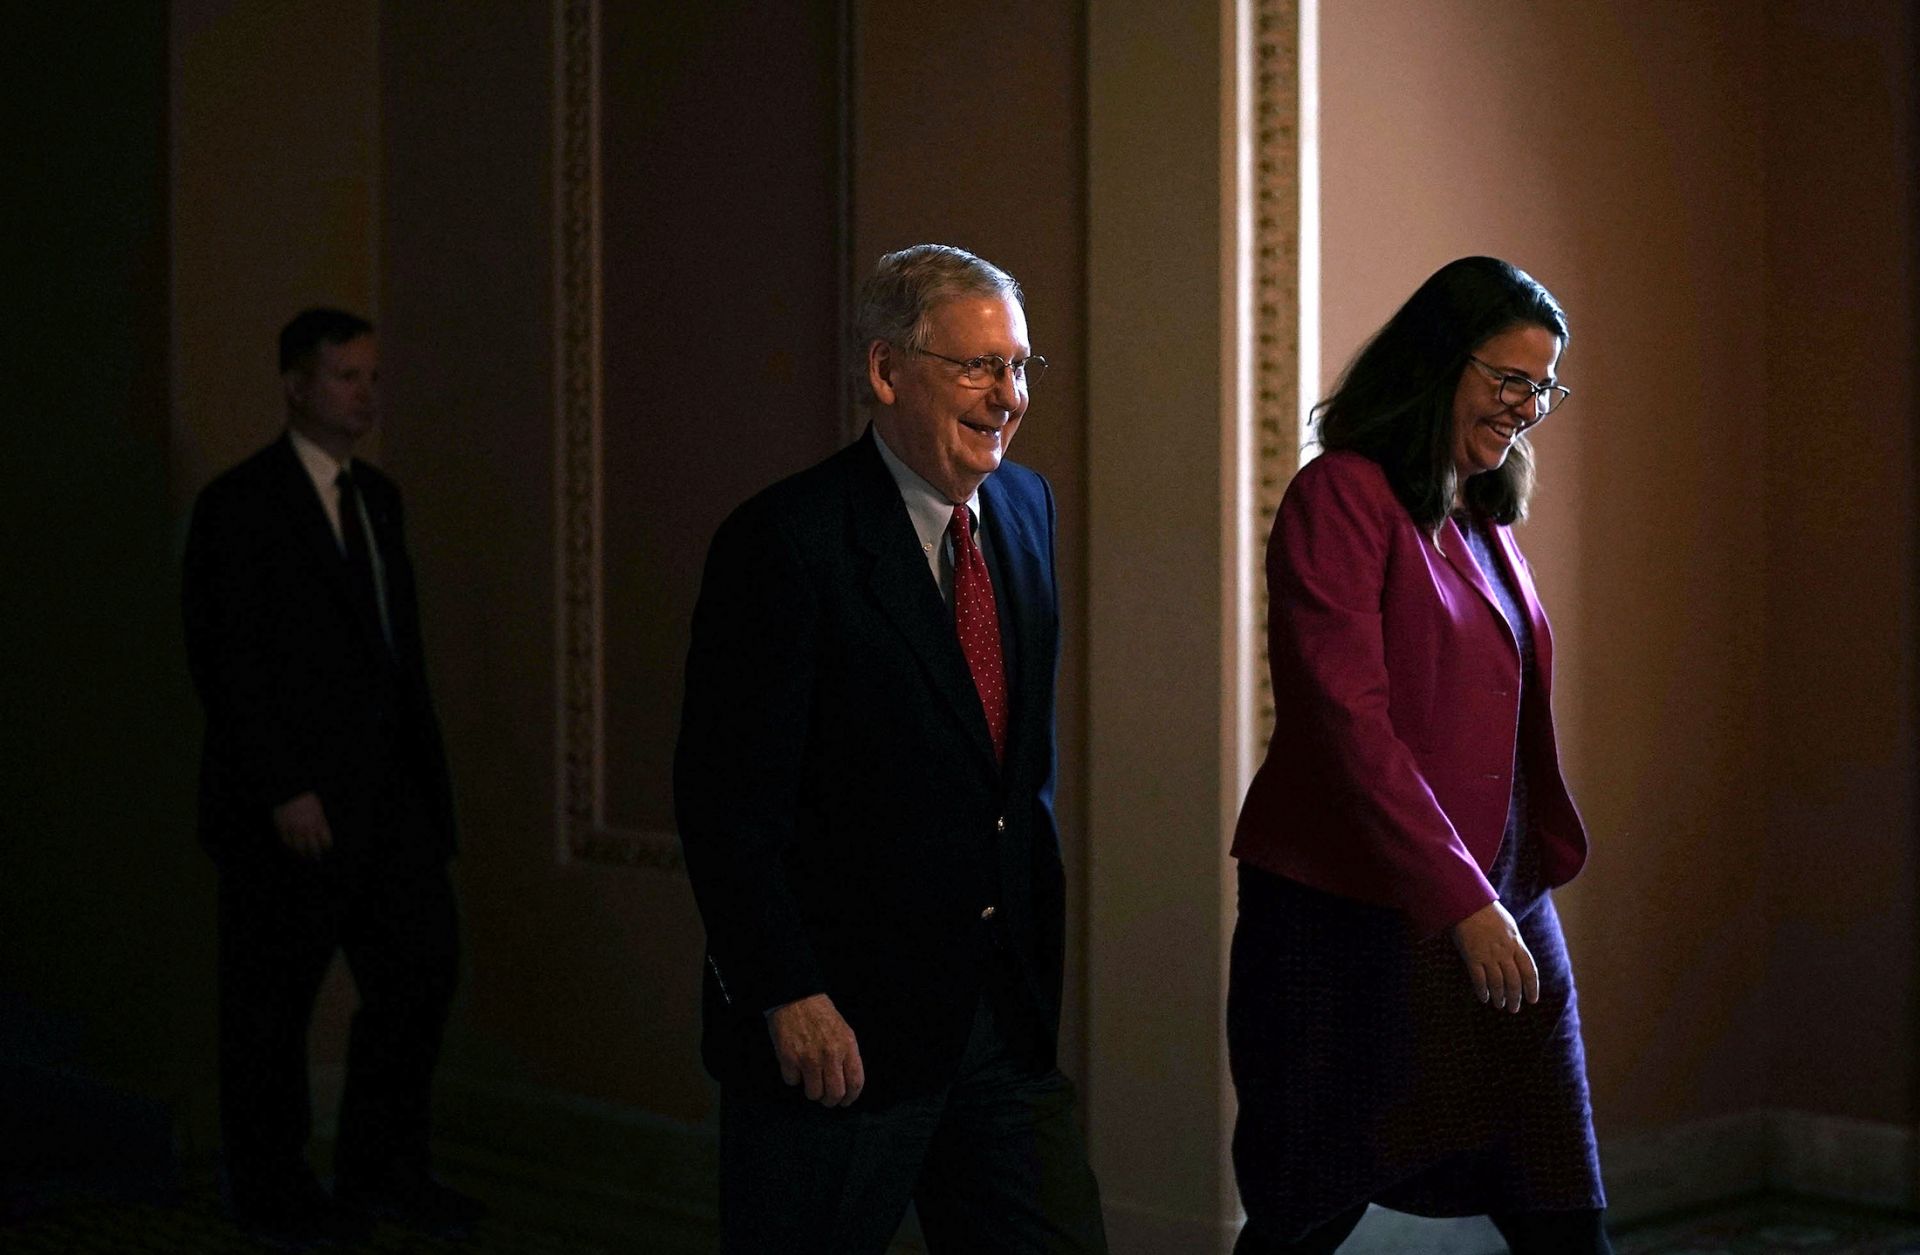 U.S. Senate Majority Leader Mitch McConnell, left, and an aide walk toward the Senate chamber in the U.S. Capitol on Feb. 12, 2018.